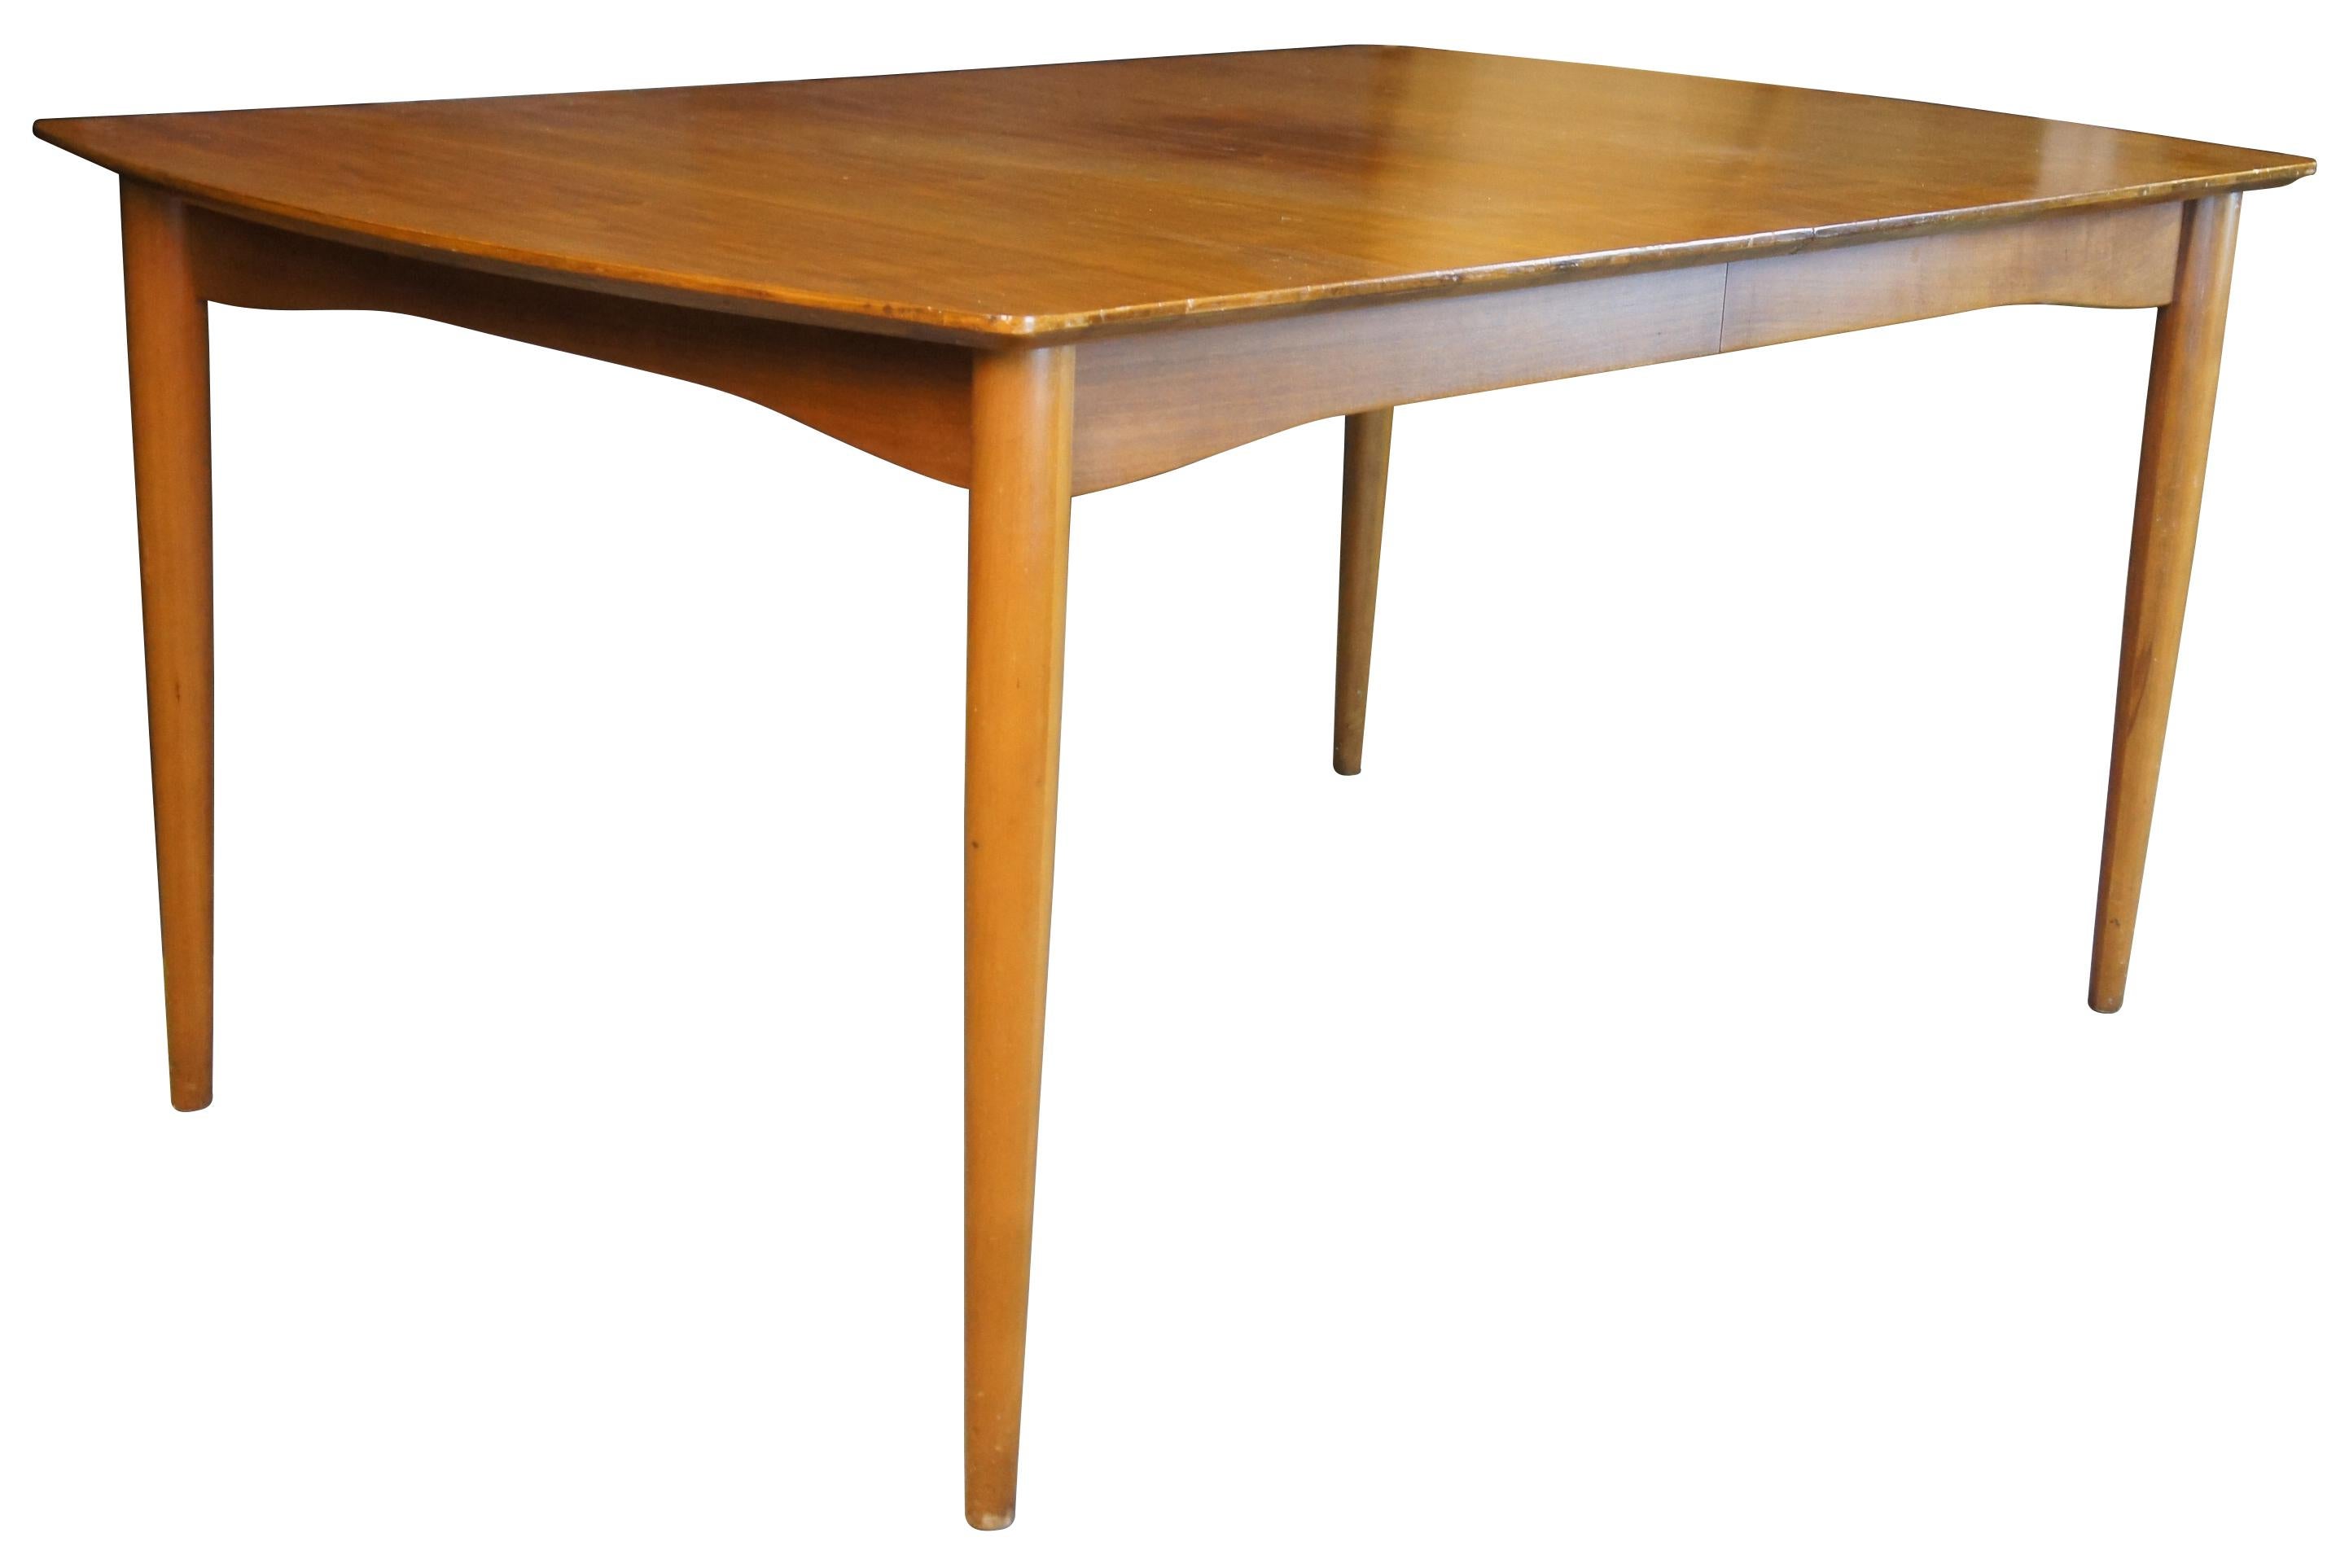 Mid-Century Modern Morganton walnut dining table featuring Danish styling with rectangular form, rounded ends, tapered legs and extra leaves.

Measures: 38